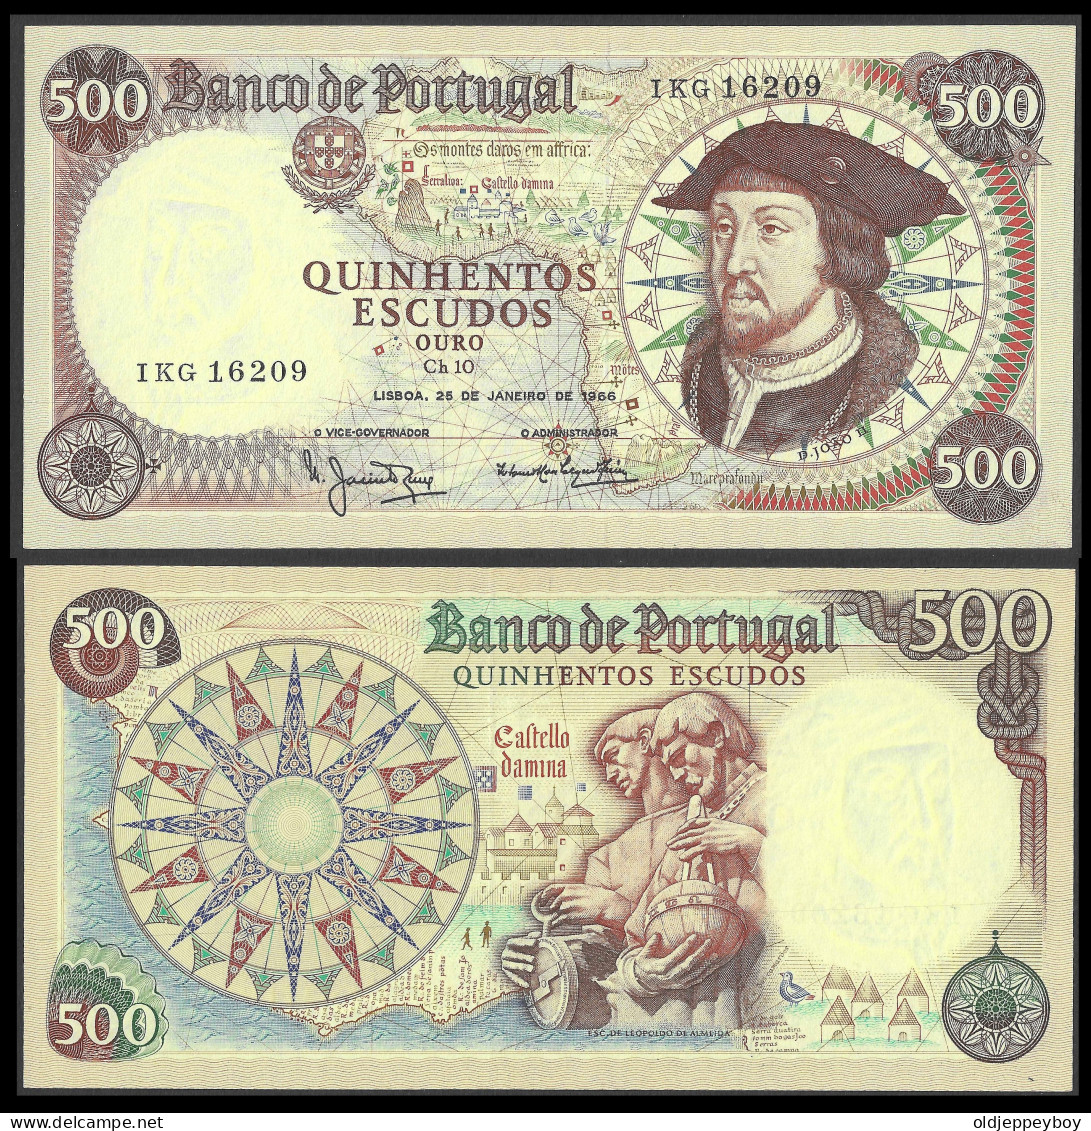 PORTUGAL 500 Escudos From1966, Ch.10, PTE, P170a(5) GEM UNC PERFECT CONDITION - Portugal